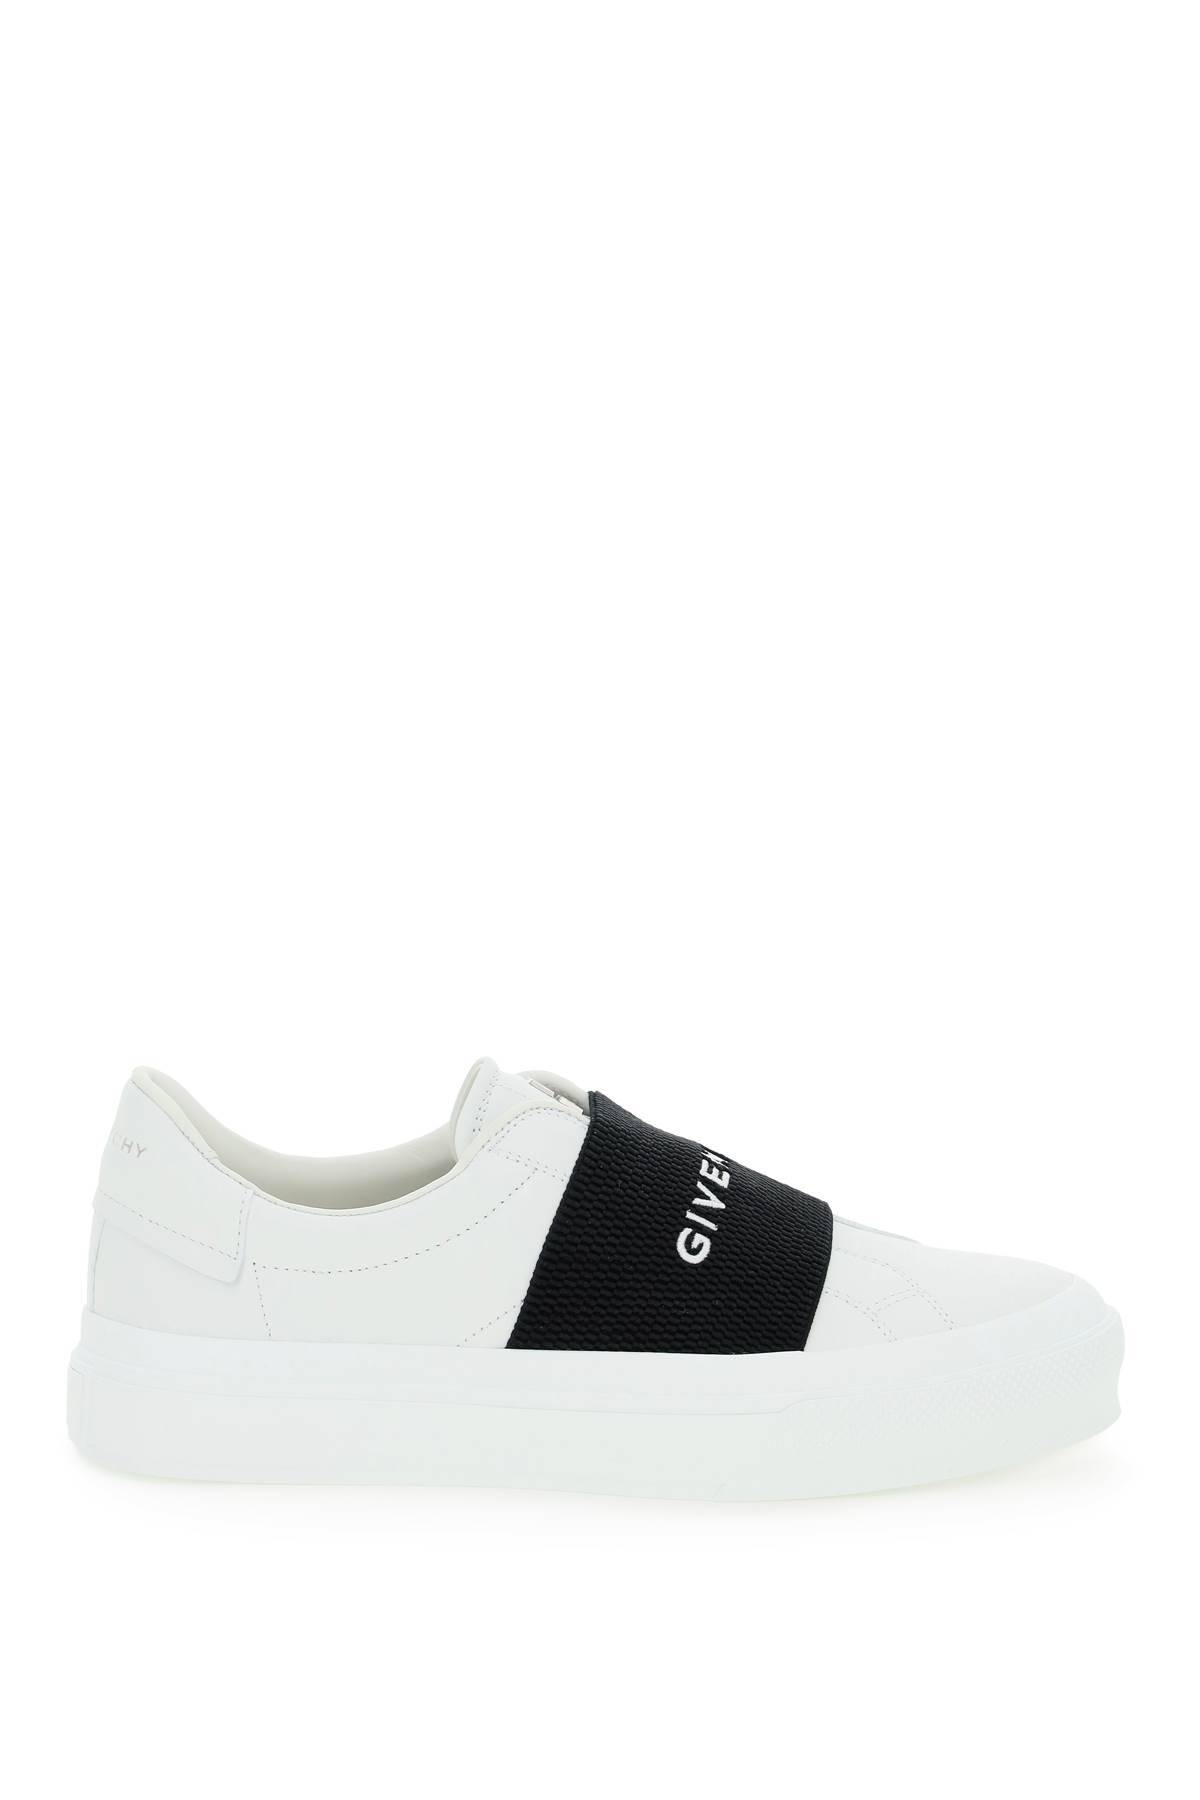 Givenchy GIVENCHY city sport sneakers